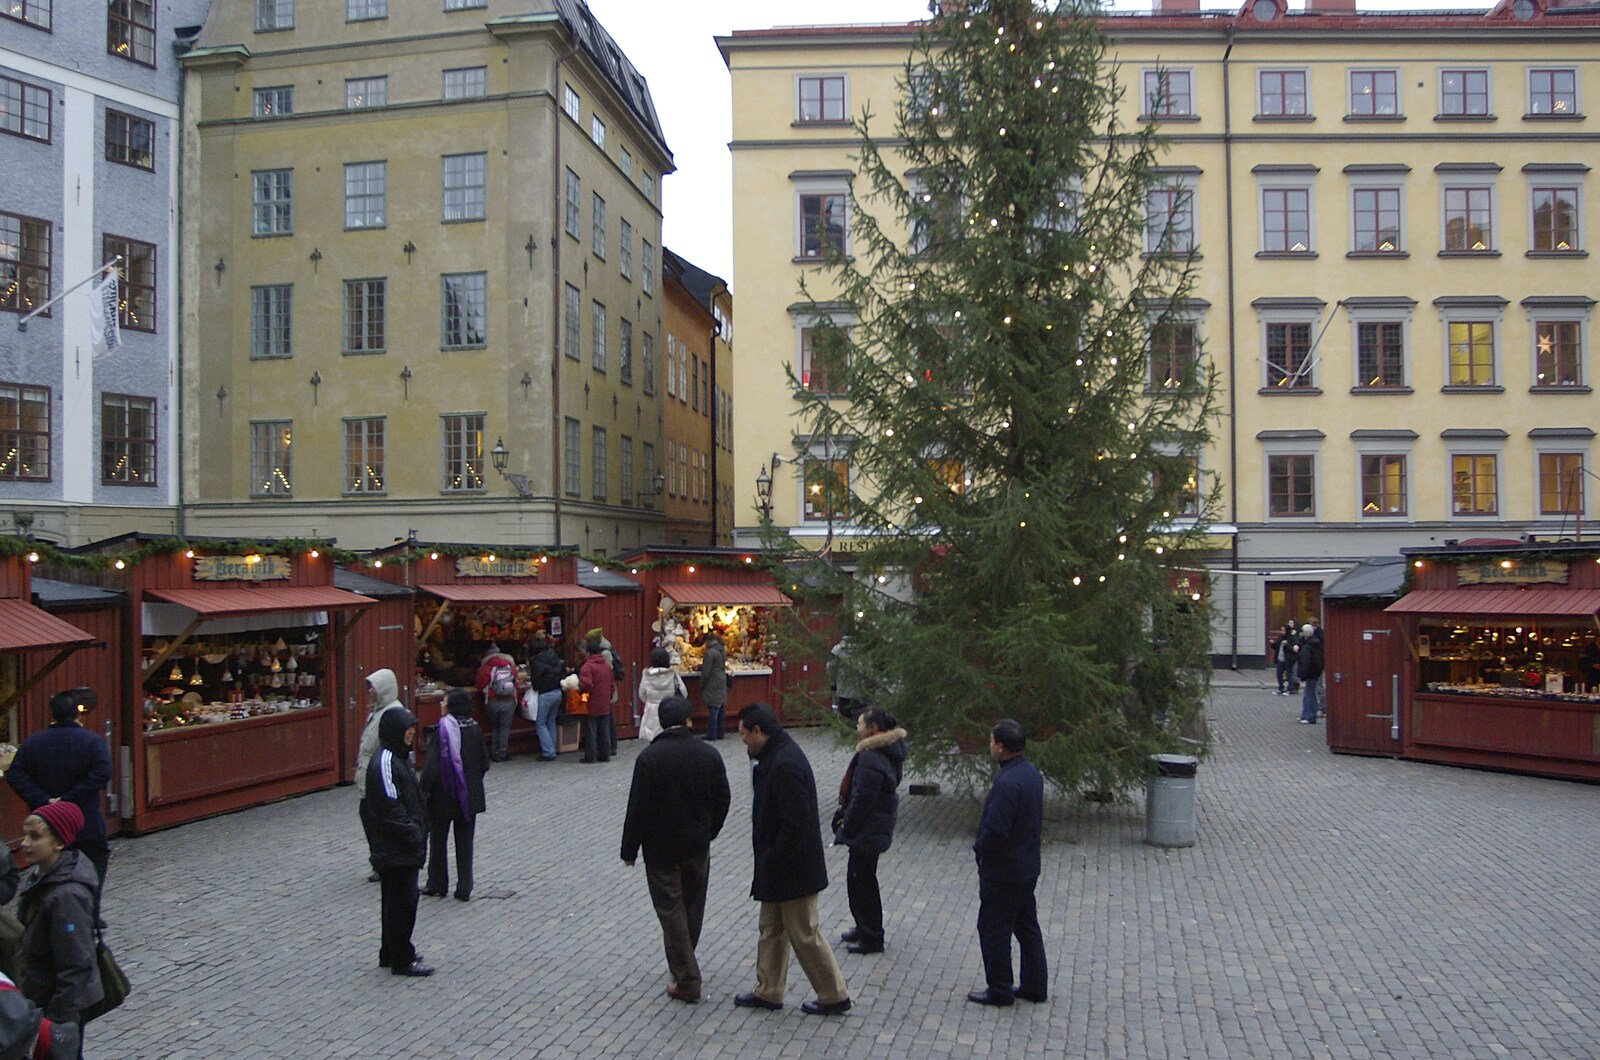 A festive Christmas tree from Gamla Stan, Stockholm, Sweden - 15th December 2007